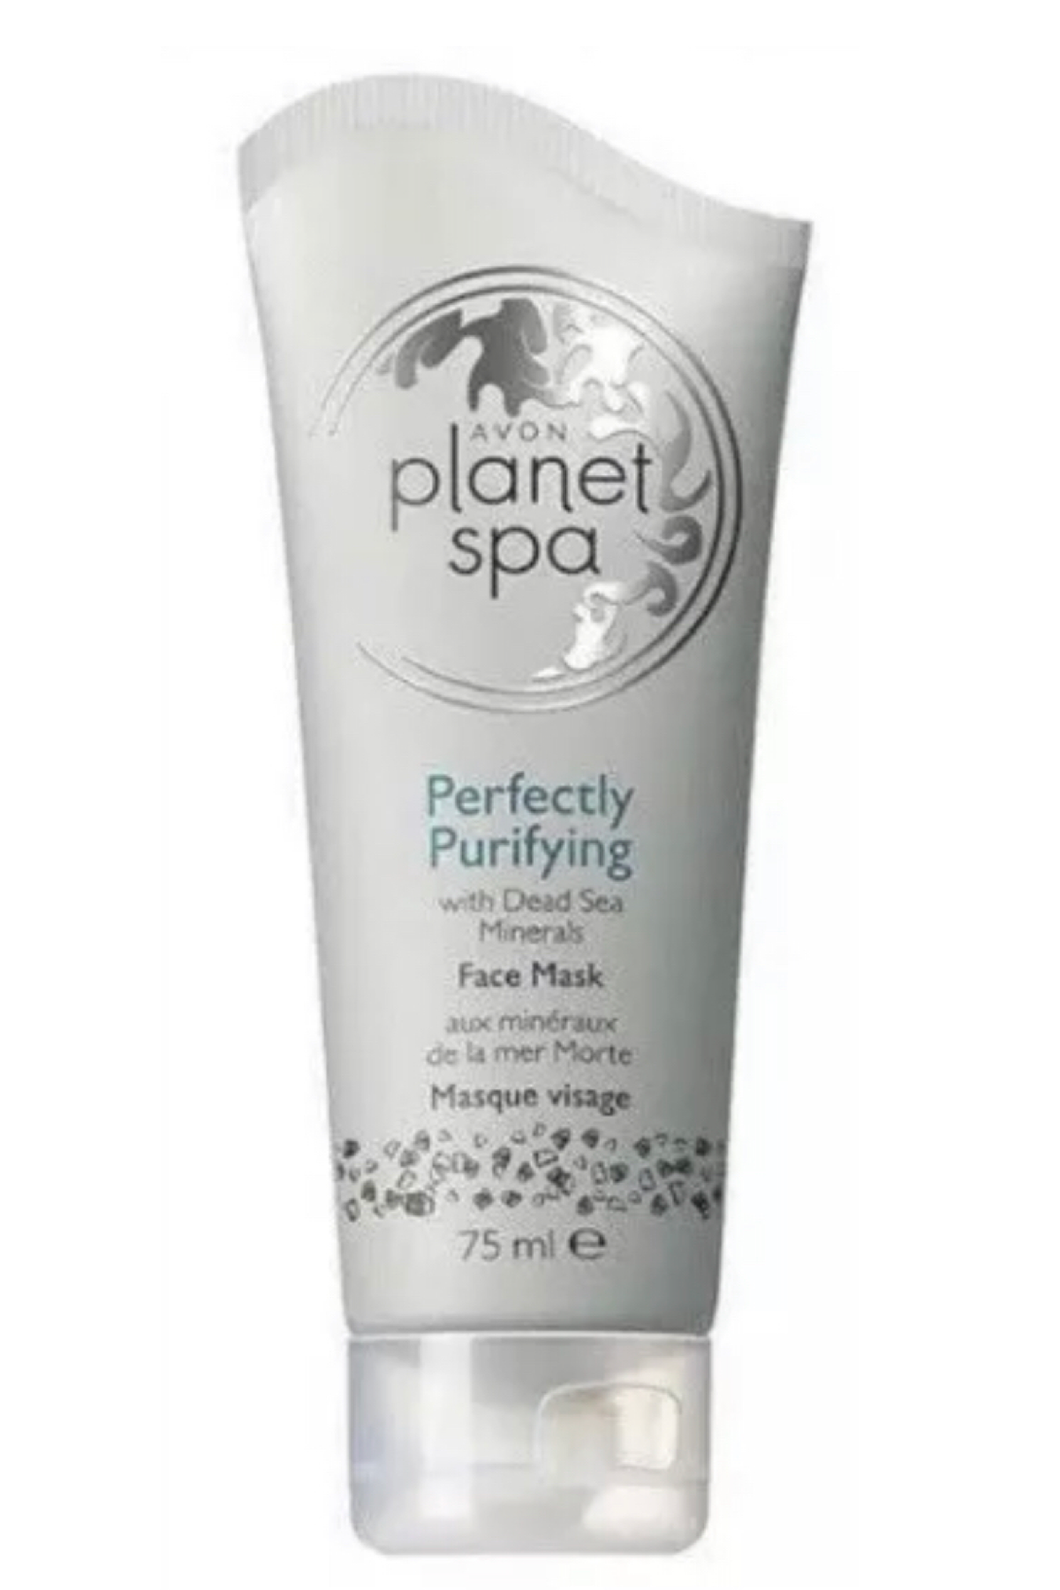 Planet Spa Perfectly Purifying with Dead Sea Minerals Face Mask 75ml